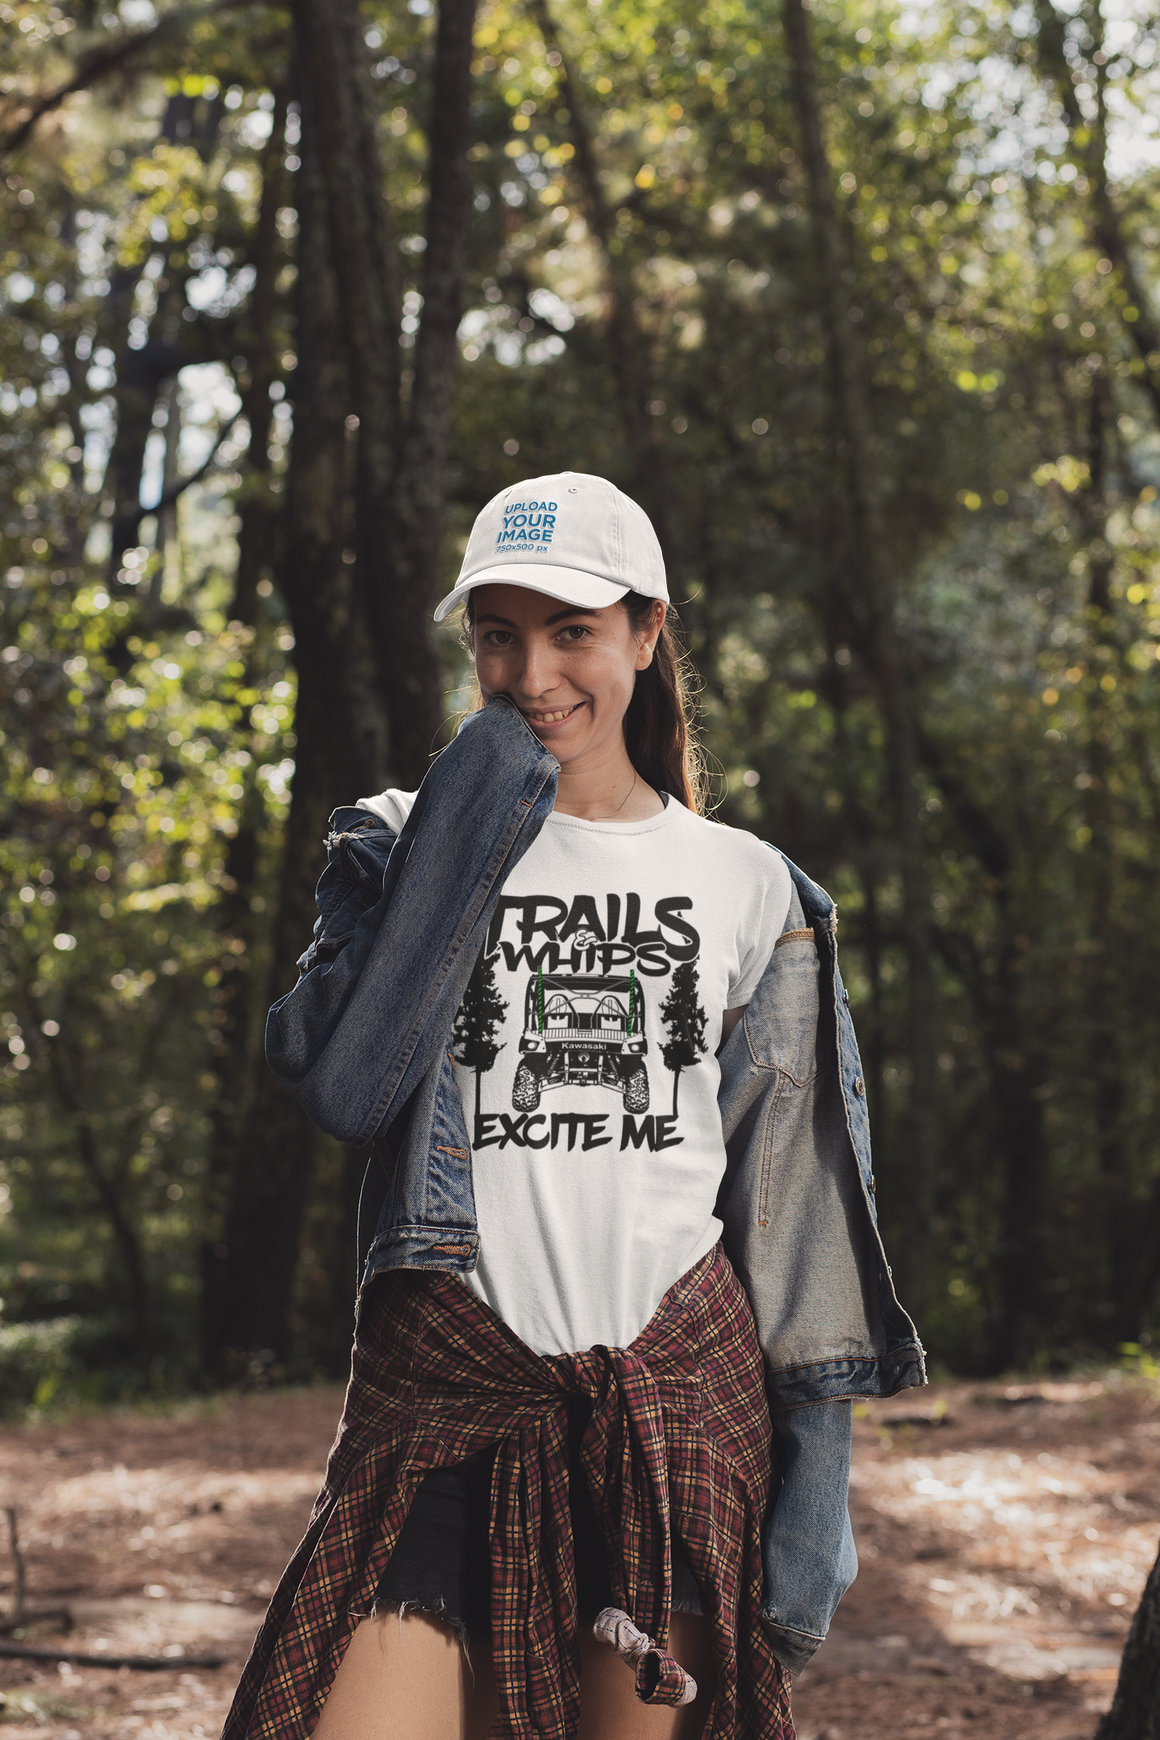 Trails & Whips Excite Me Ladies T-shirt